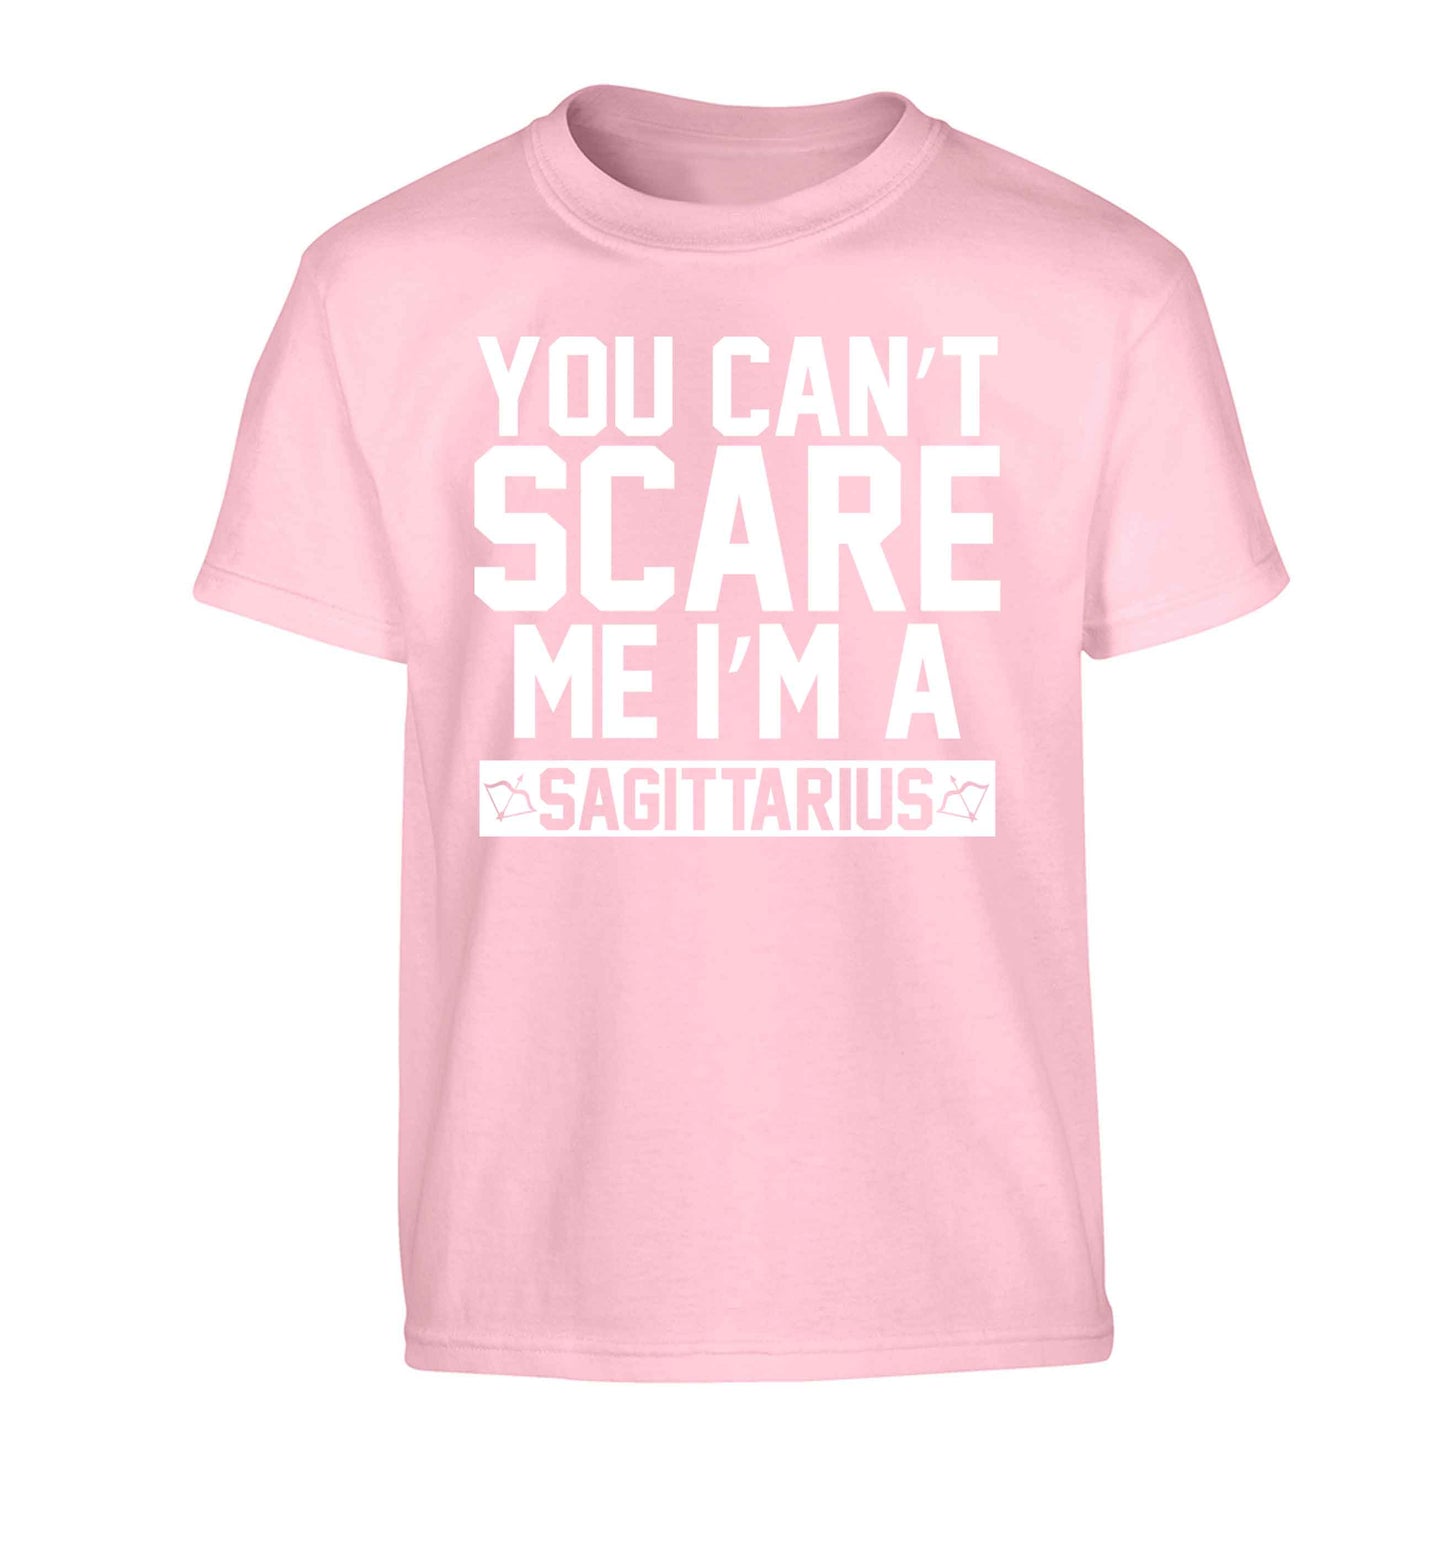 You can't scare me I'm a sagittarius Children's light pink Tshirt 12-13 Years